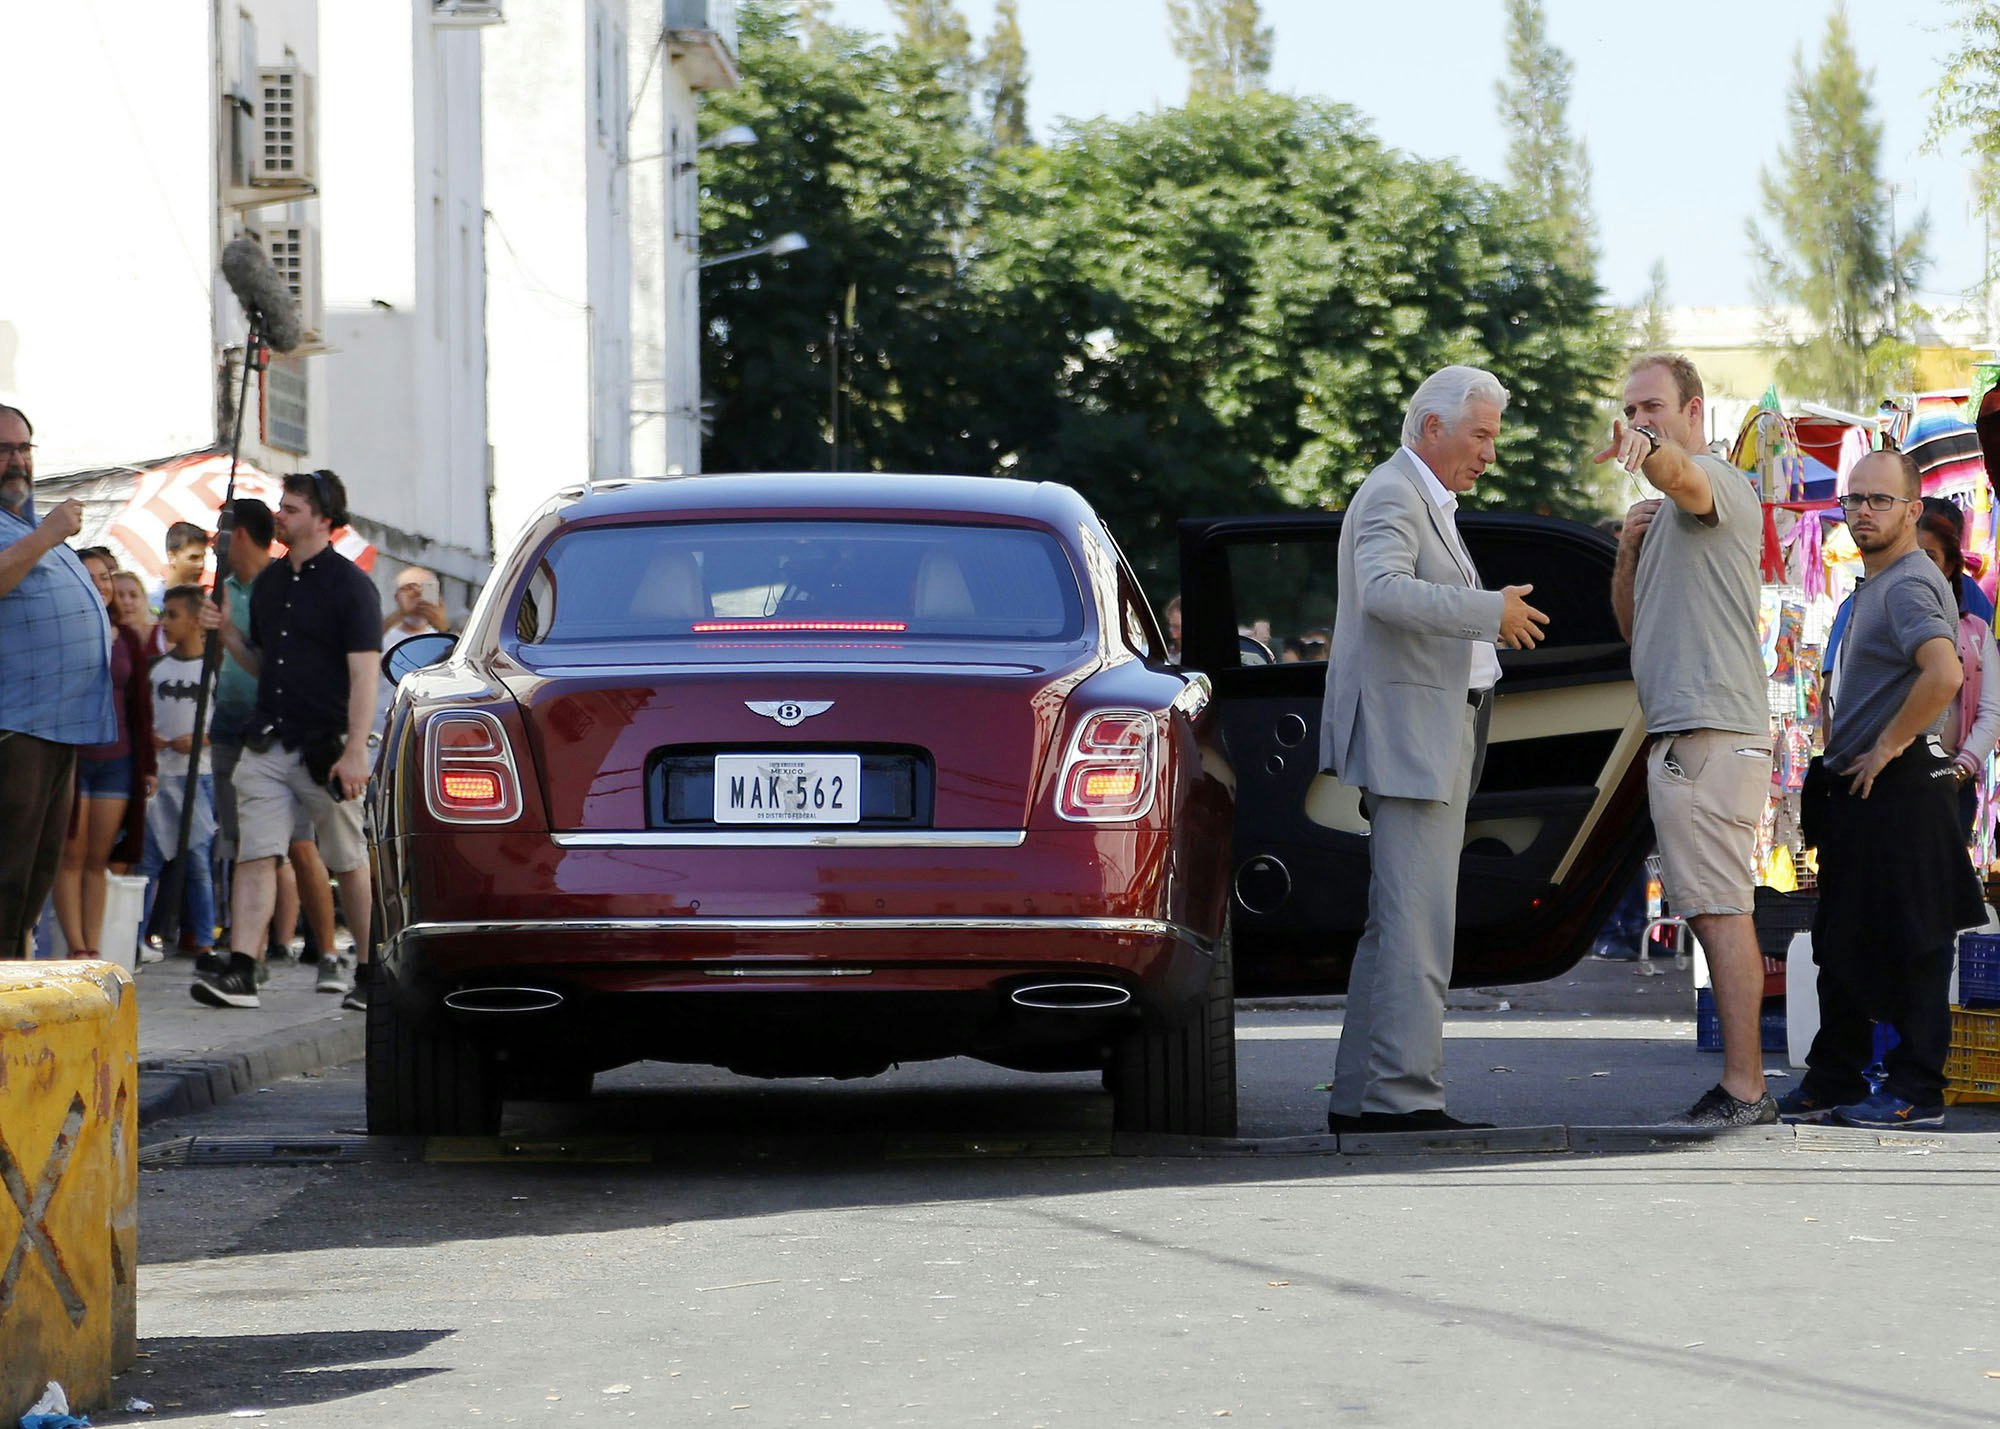 Travel News - Richard Gere On The Set Filming of 'MotherFatherSon', the BBC New Series